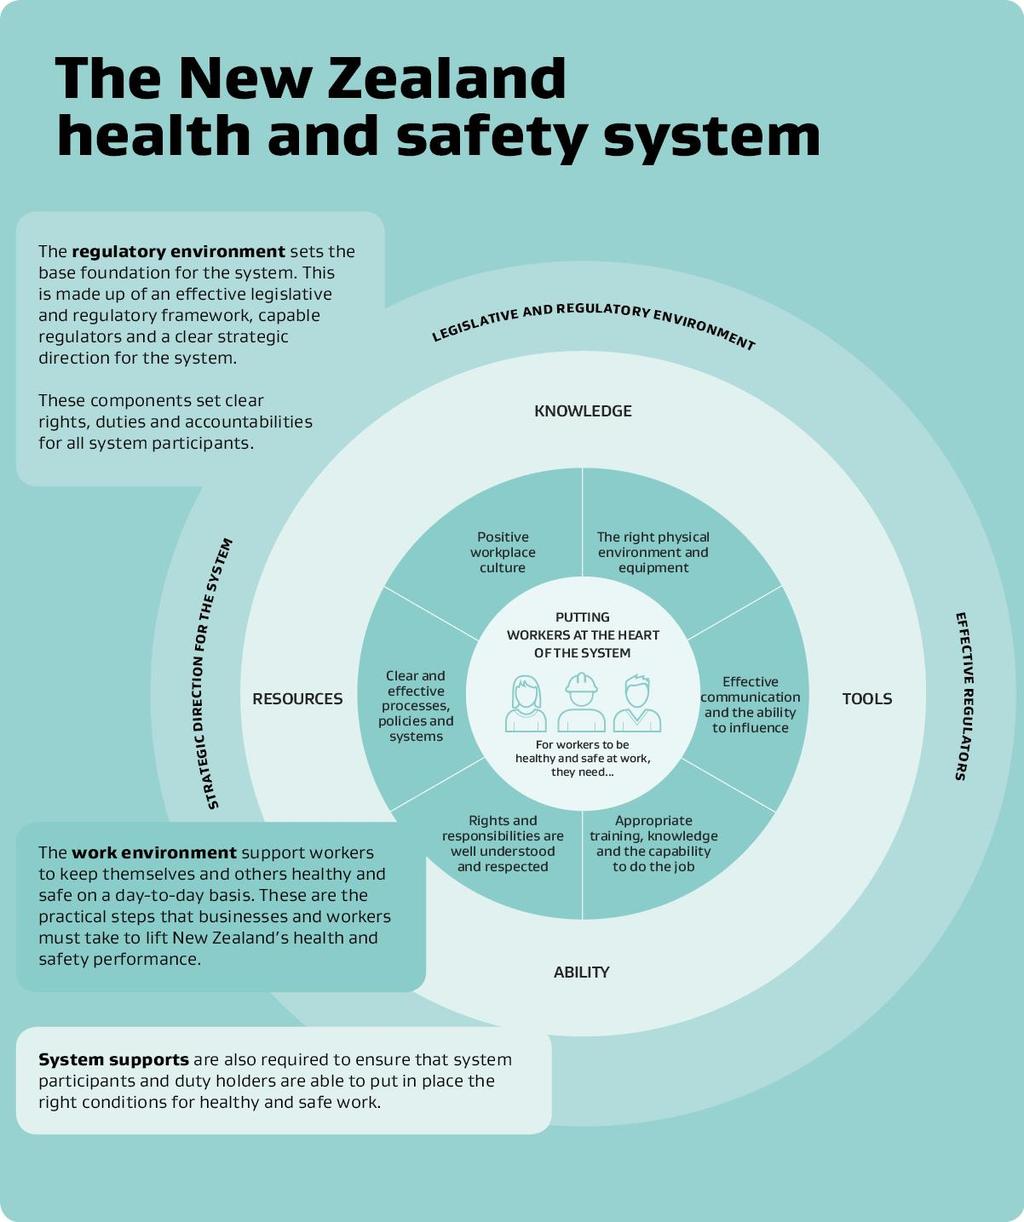 What is the health and safety system? To deliver sustained improvements in health and safety performance the system needs to put workers at its centre.